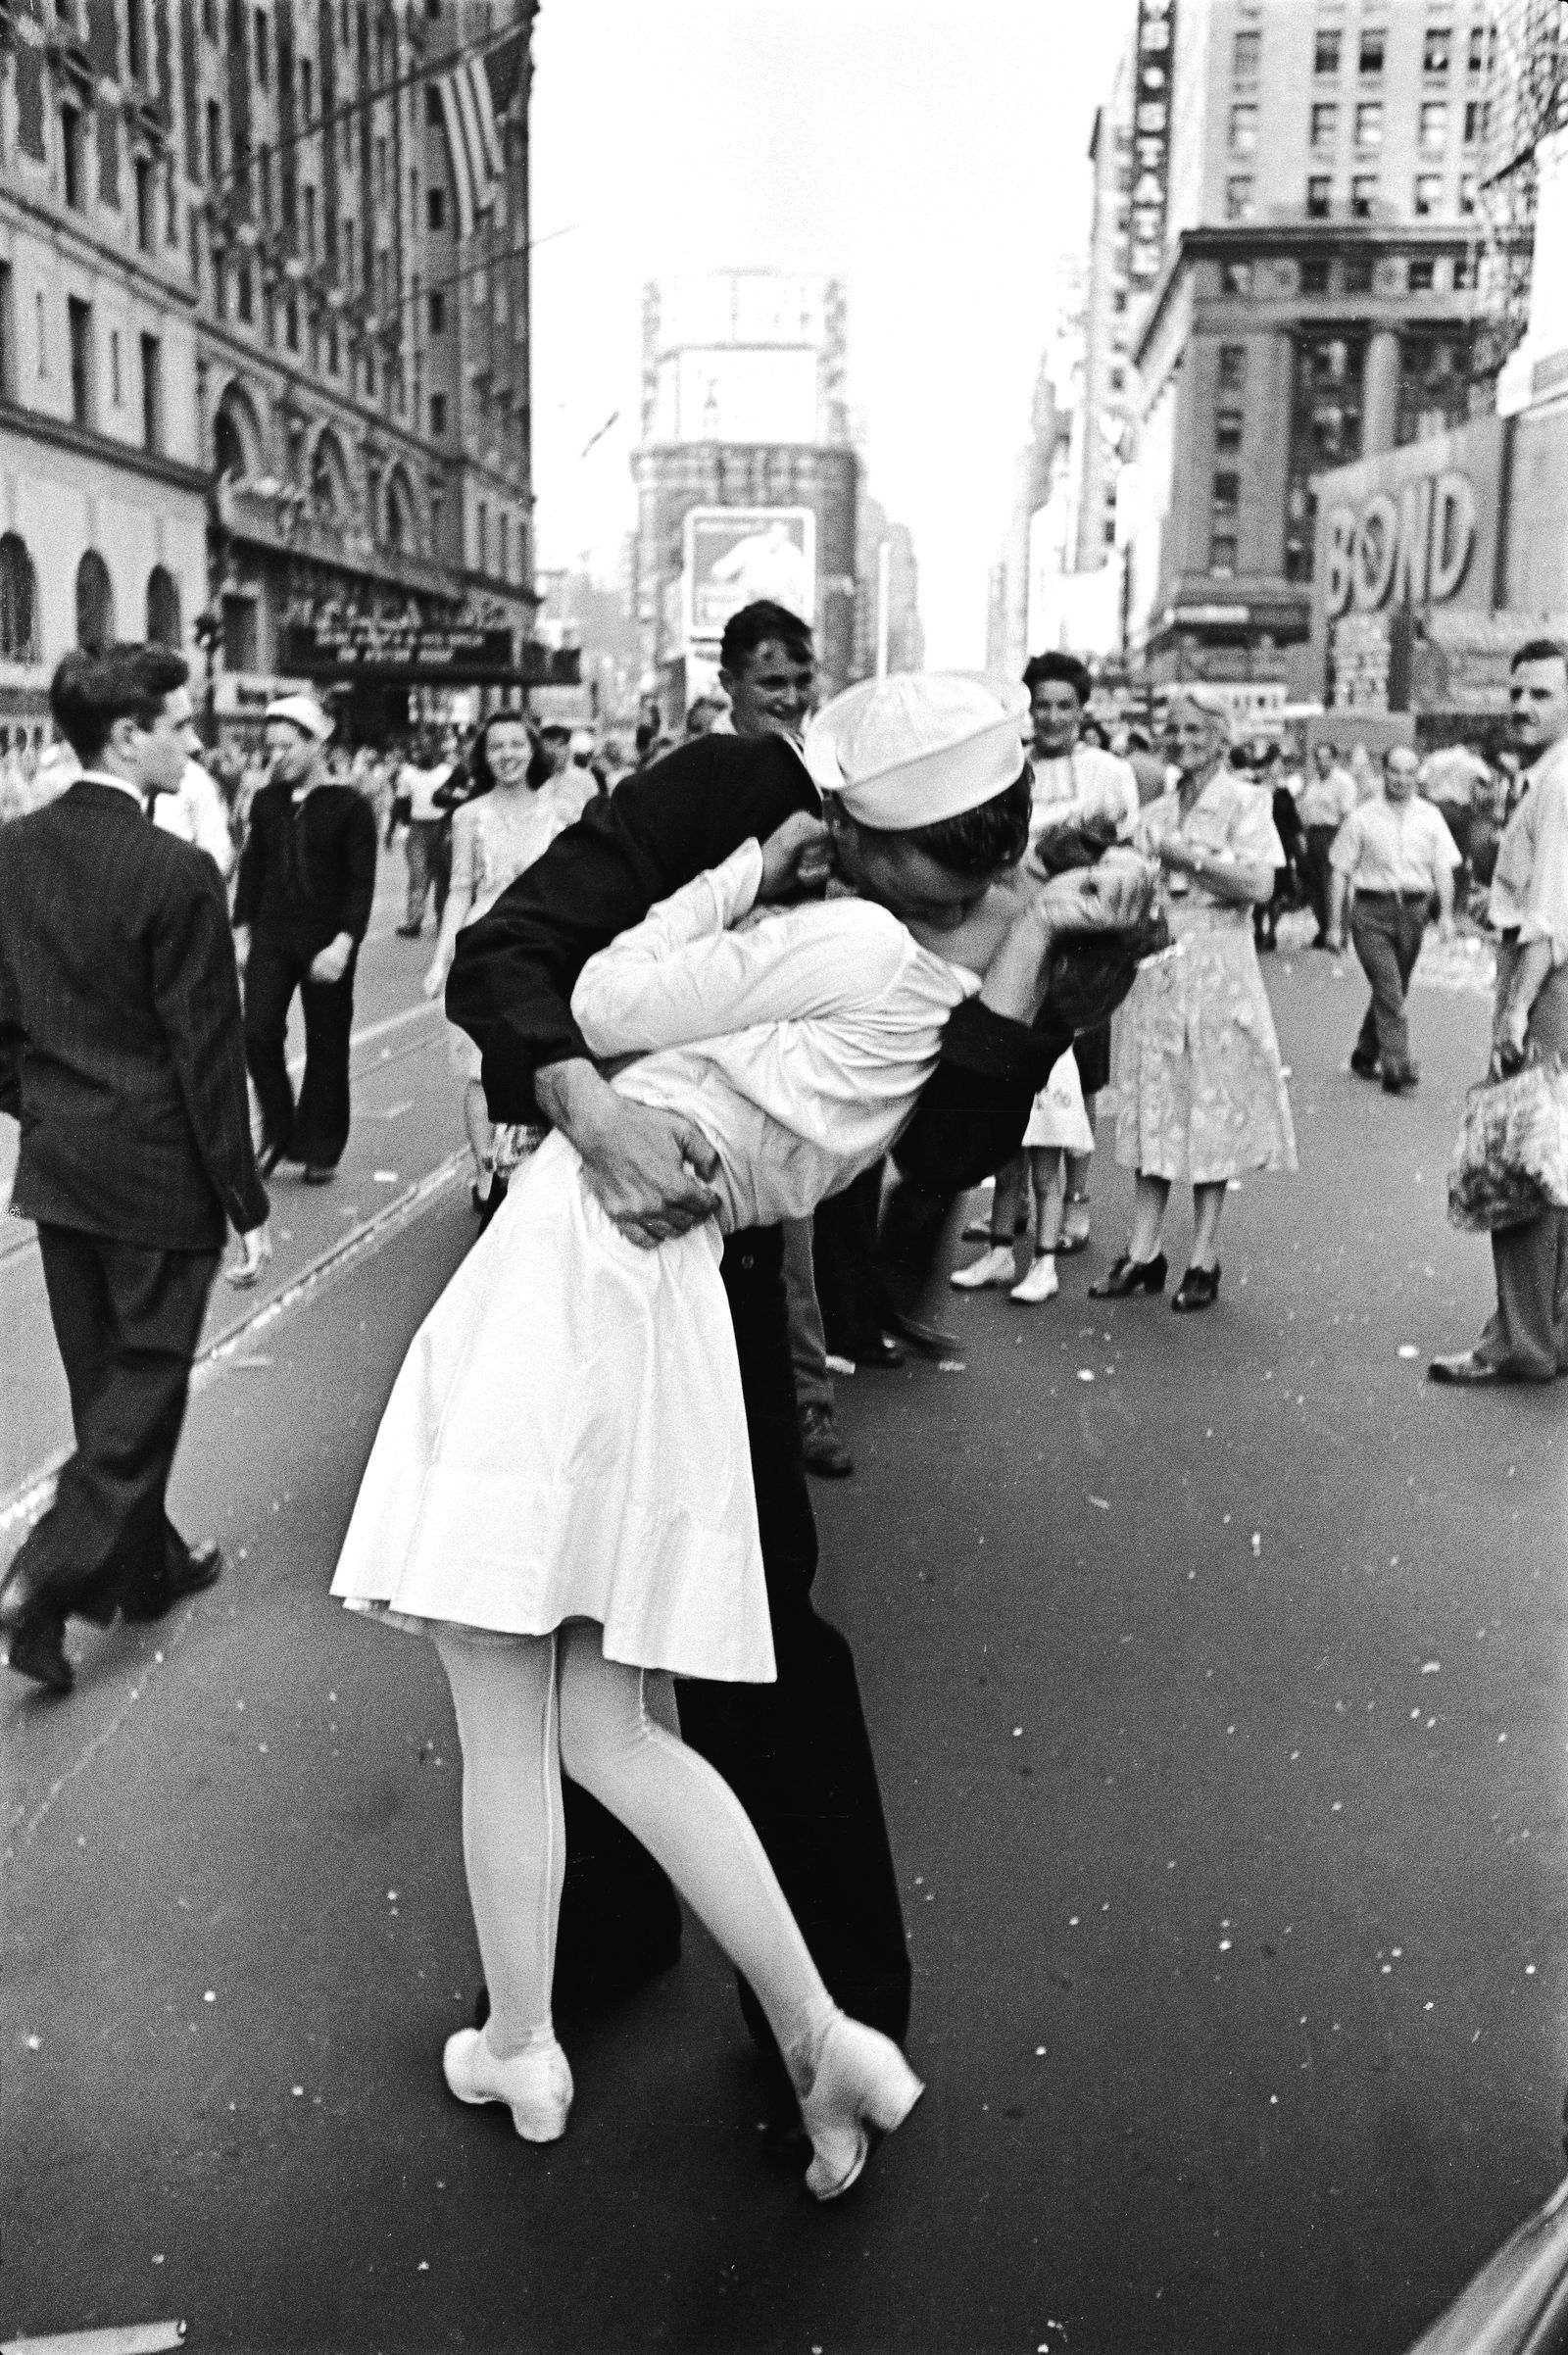 The Woman in the Iconic V-J Day Kiss Photo Died at 92, Here's Her